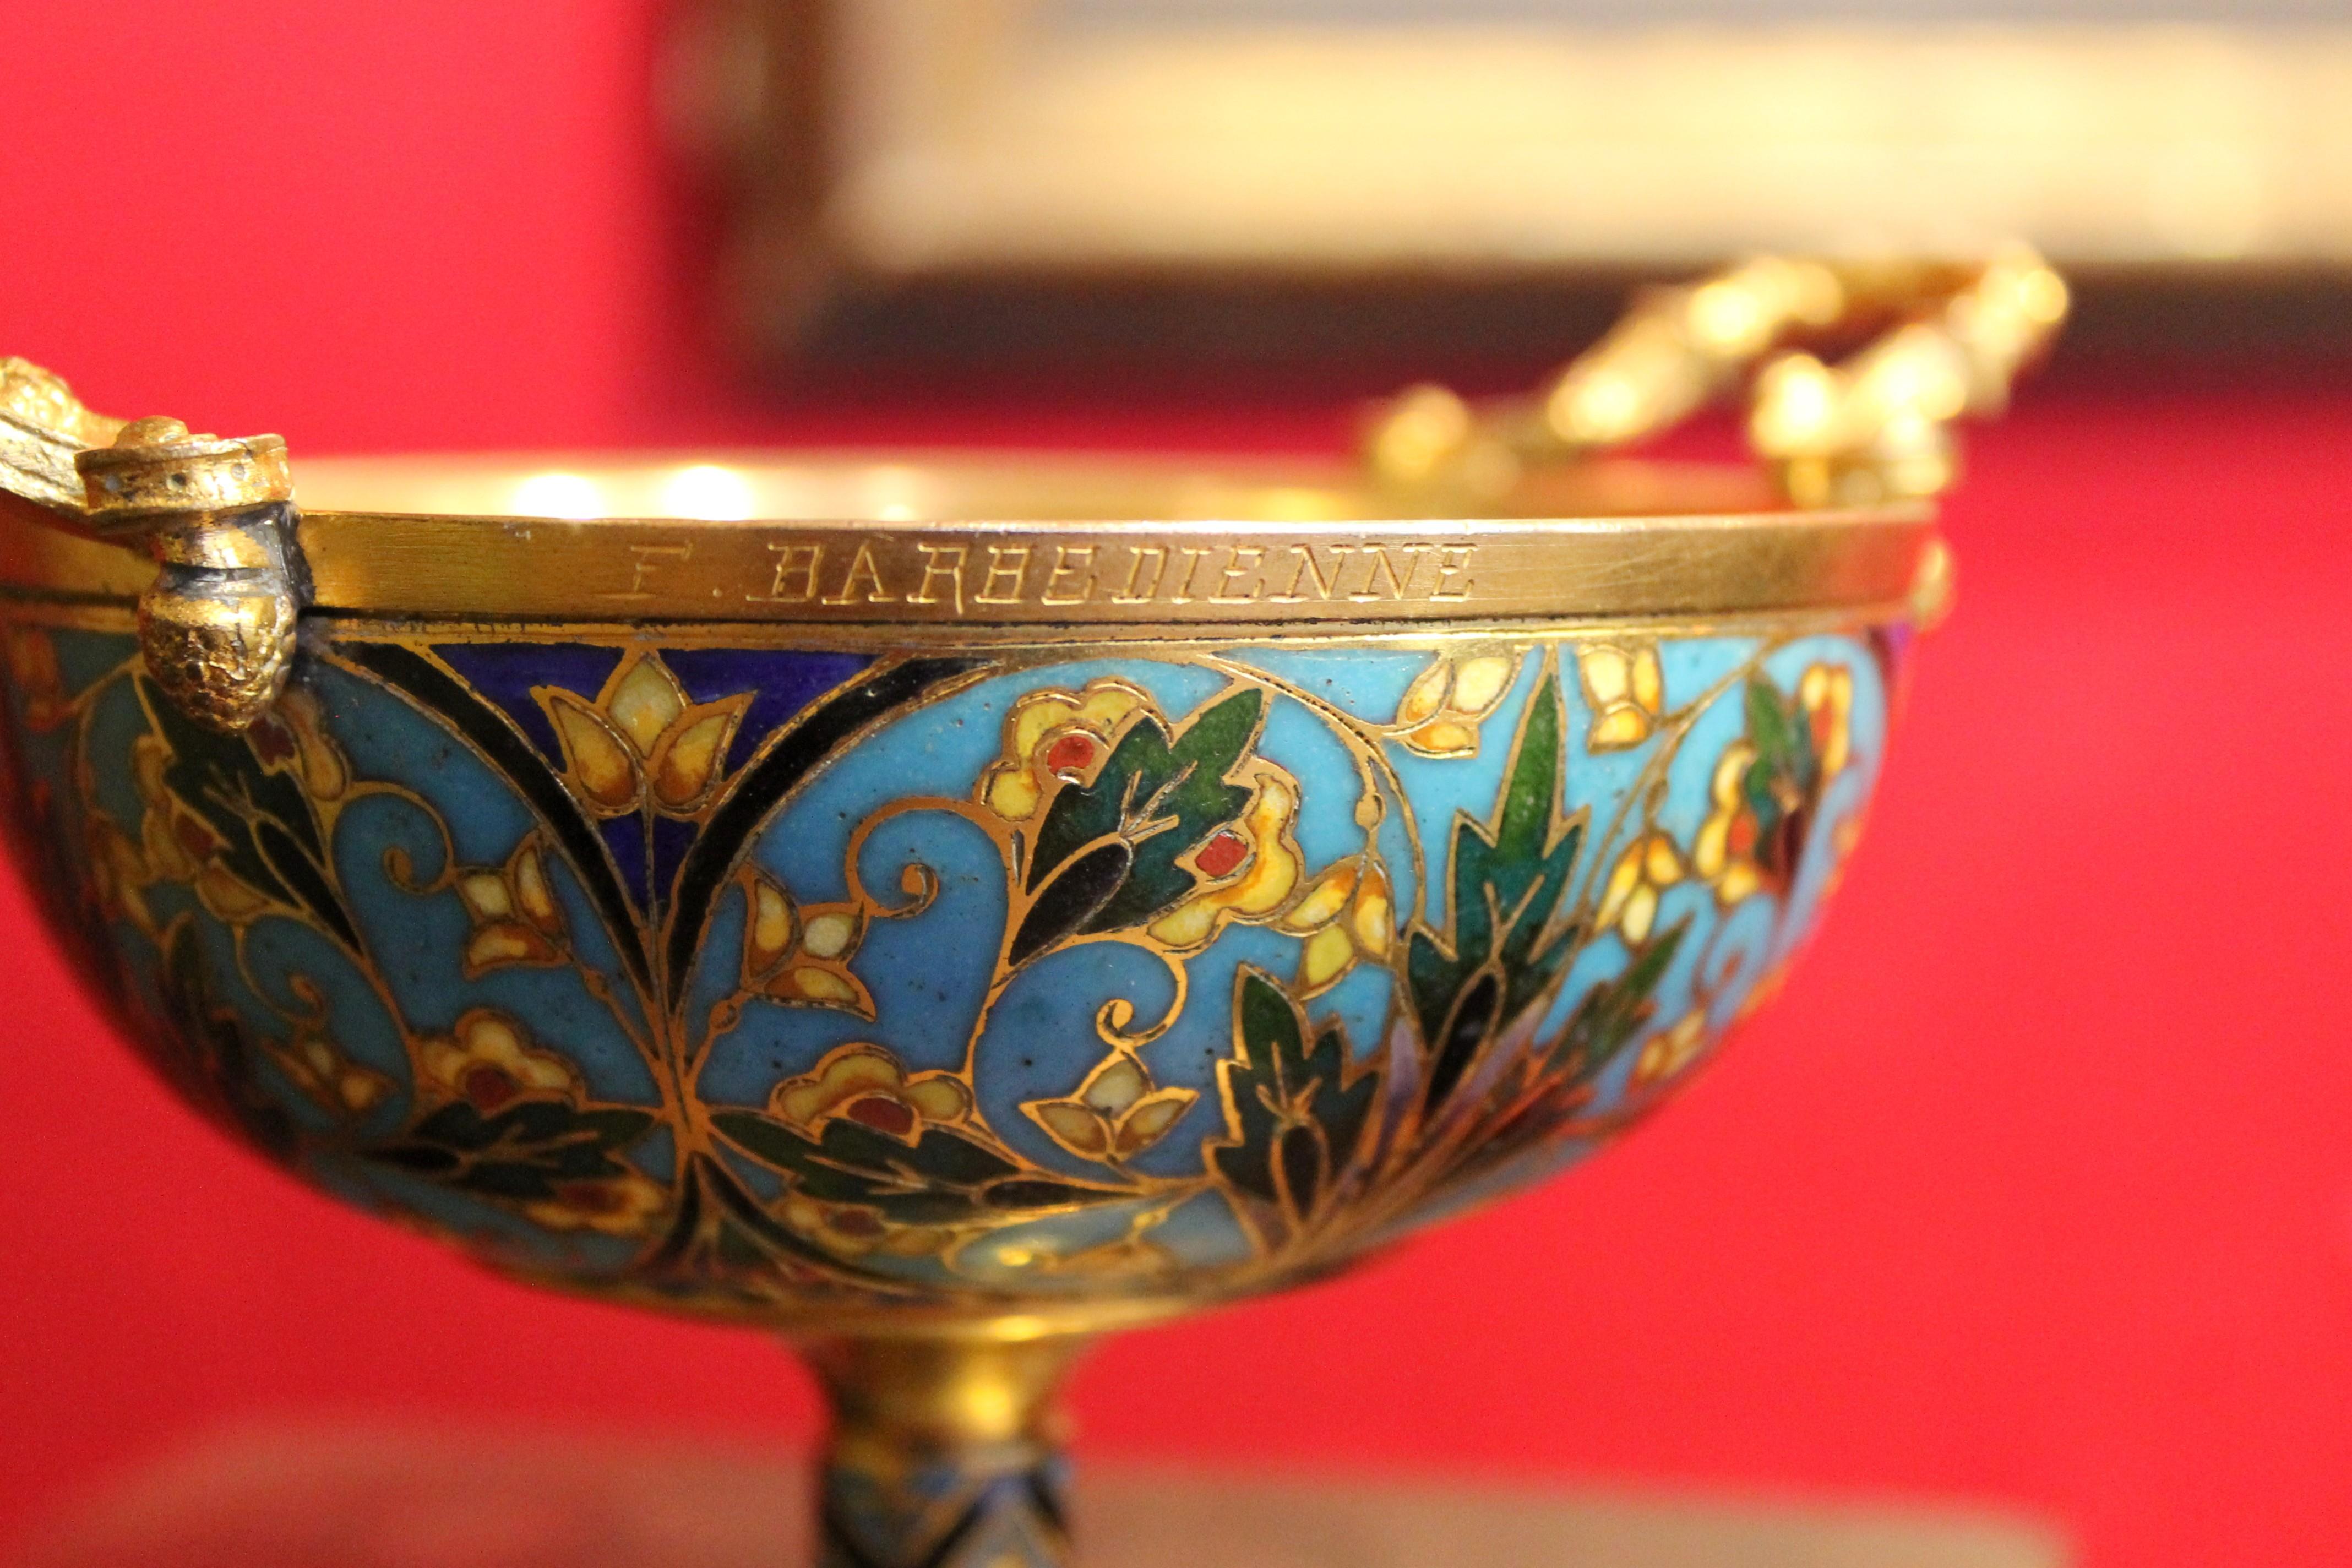 Napoleon III F. Barbedienne, 19th Century French Gilt Bronze and Cloisonnè Enamel Tazza Cup